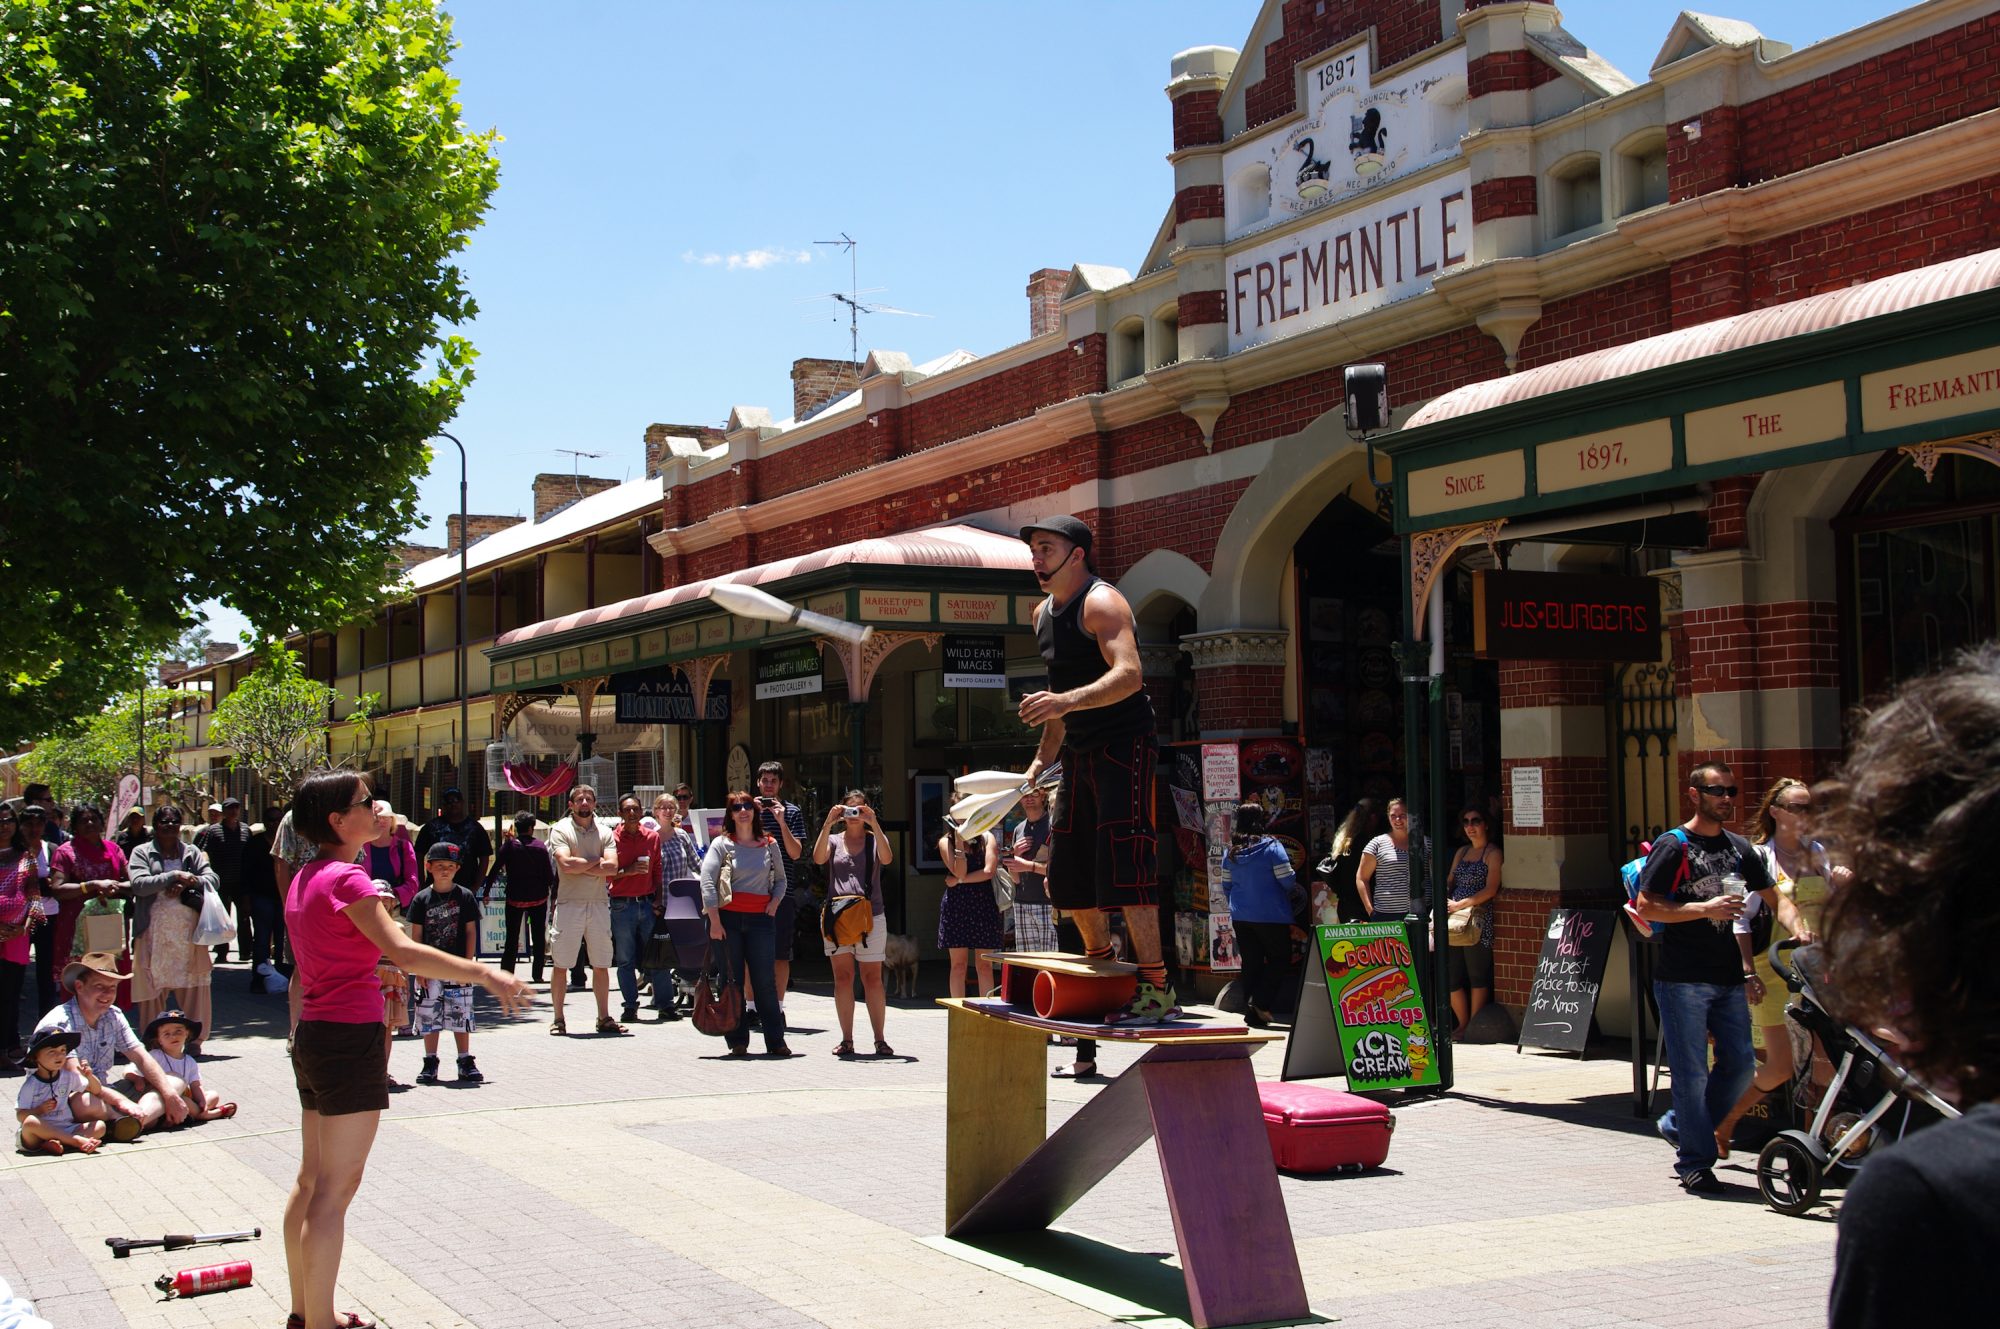 stay at callans apartments and visit the fremantle markets